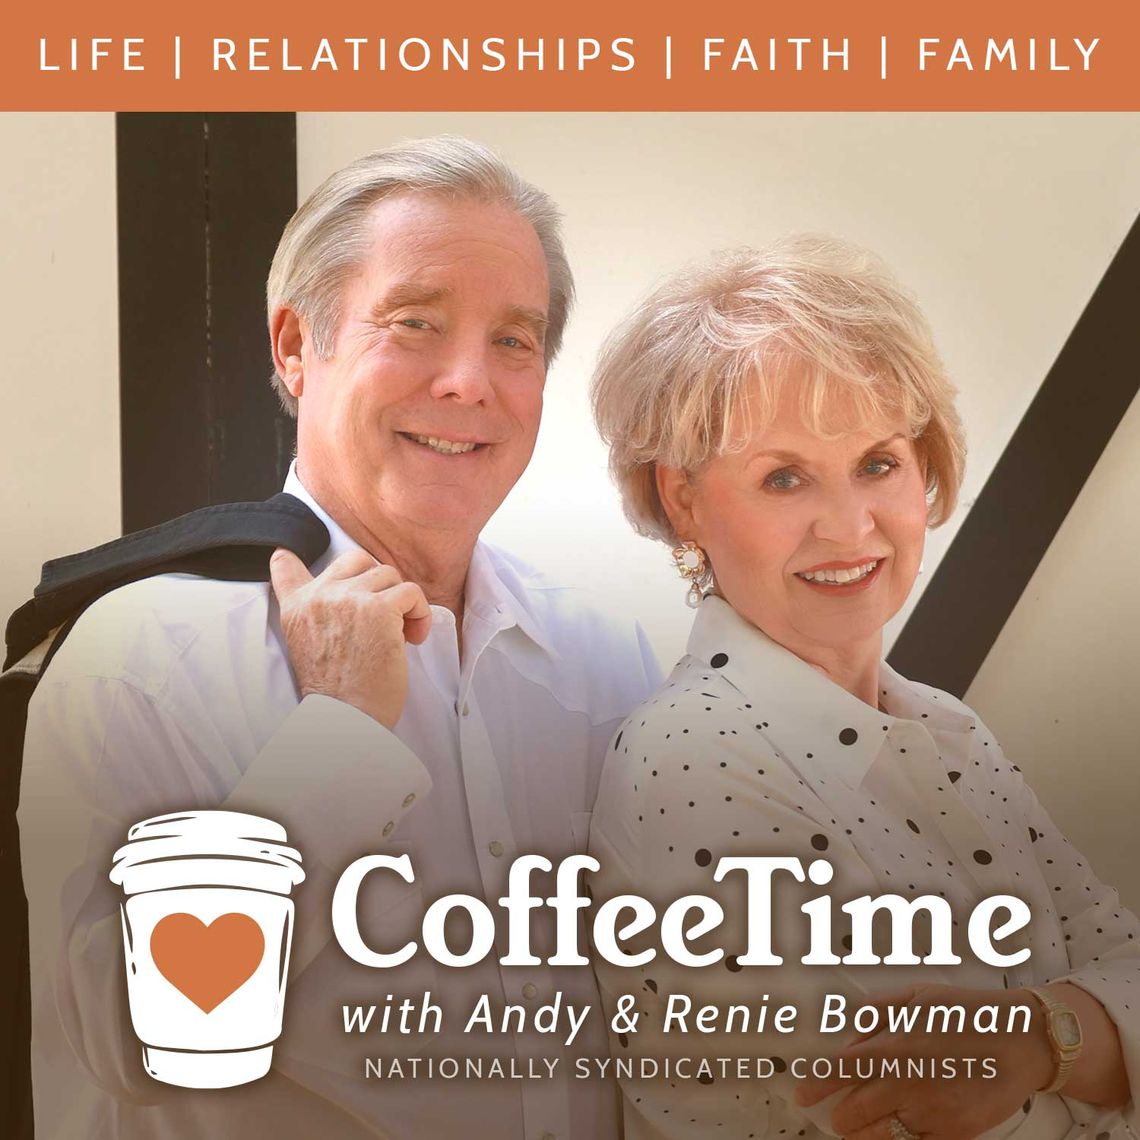 CoffeeTime: THINK YOU MARRIED WRONG?